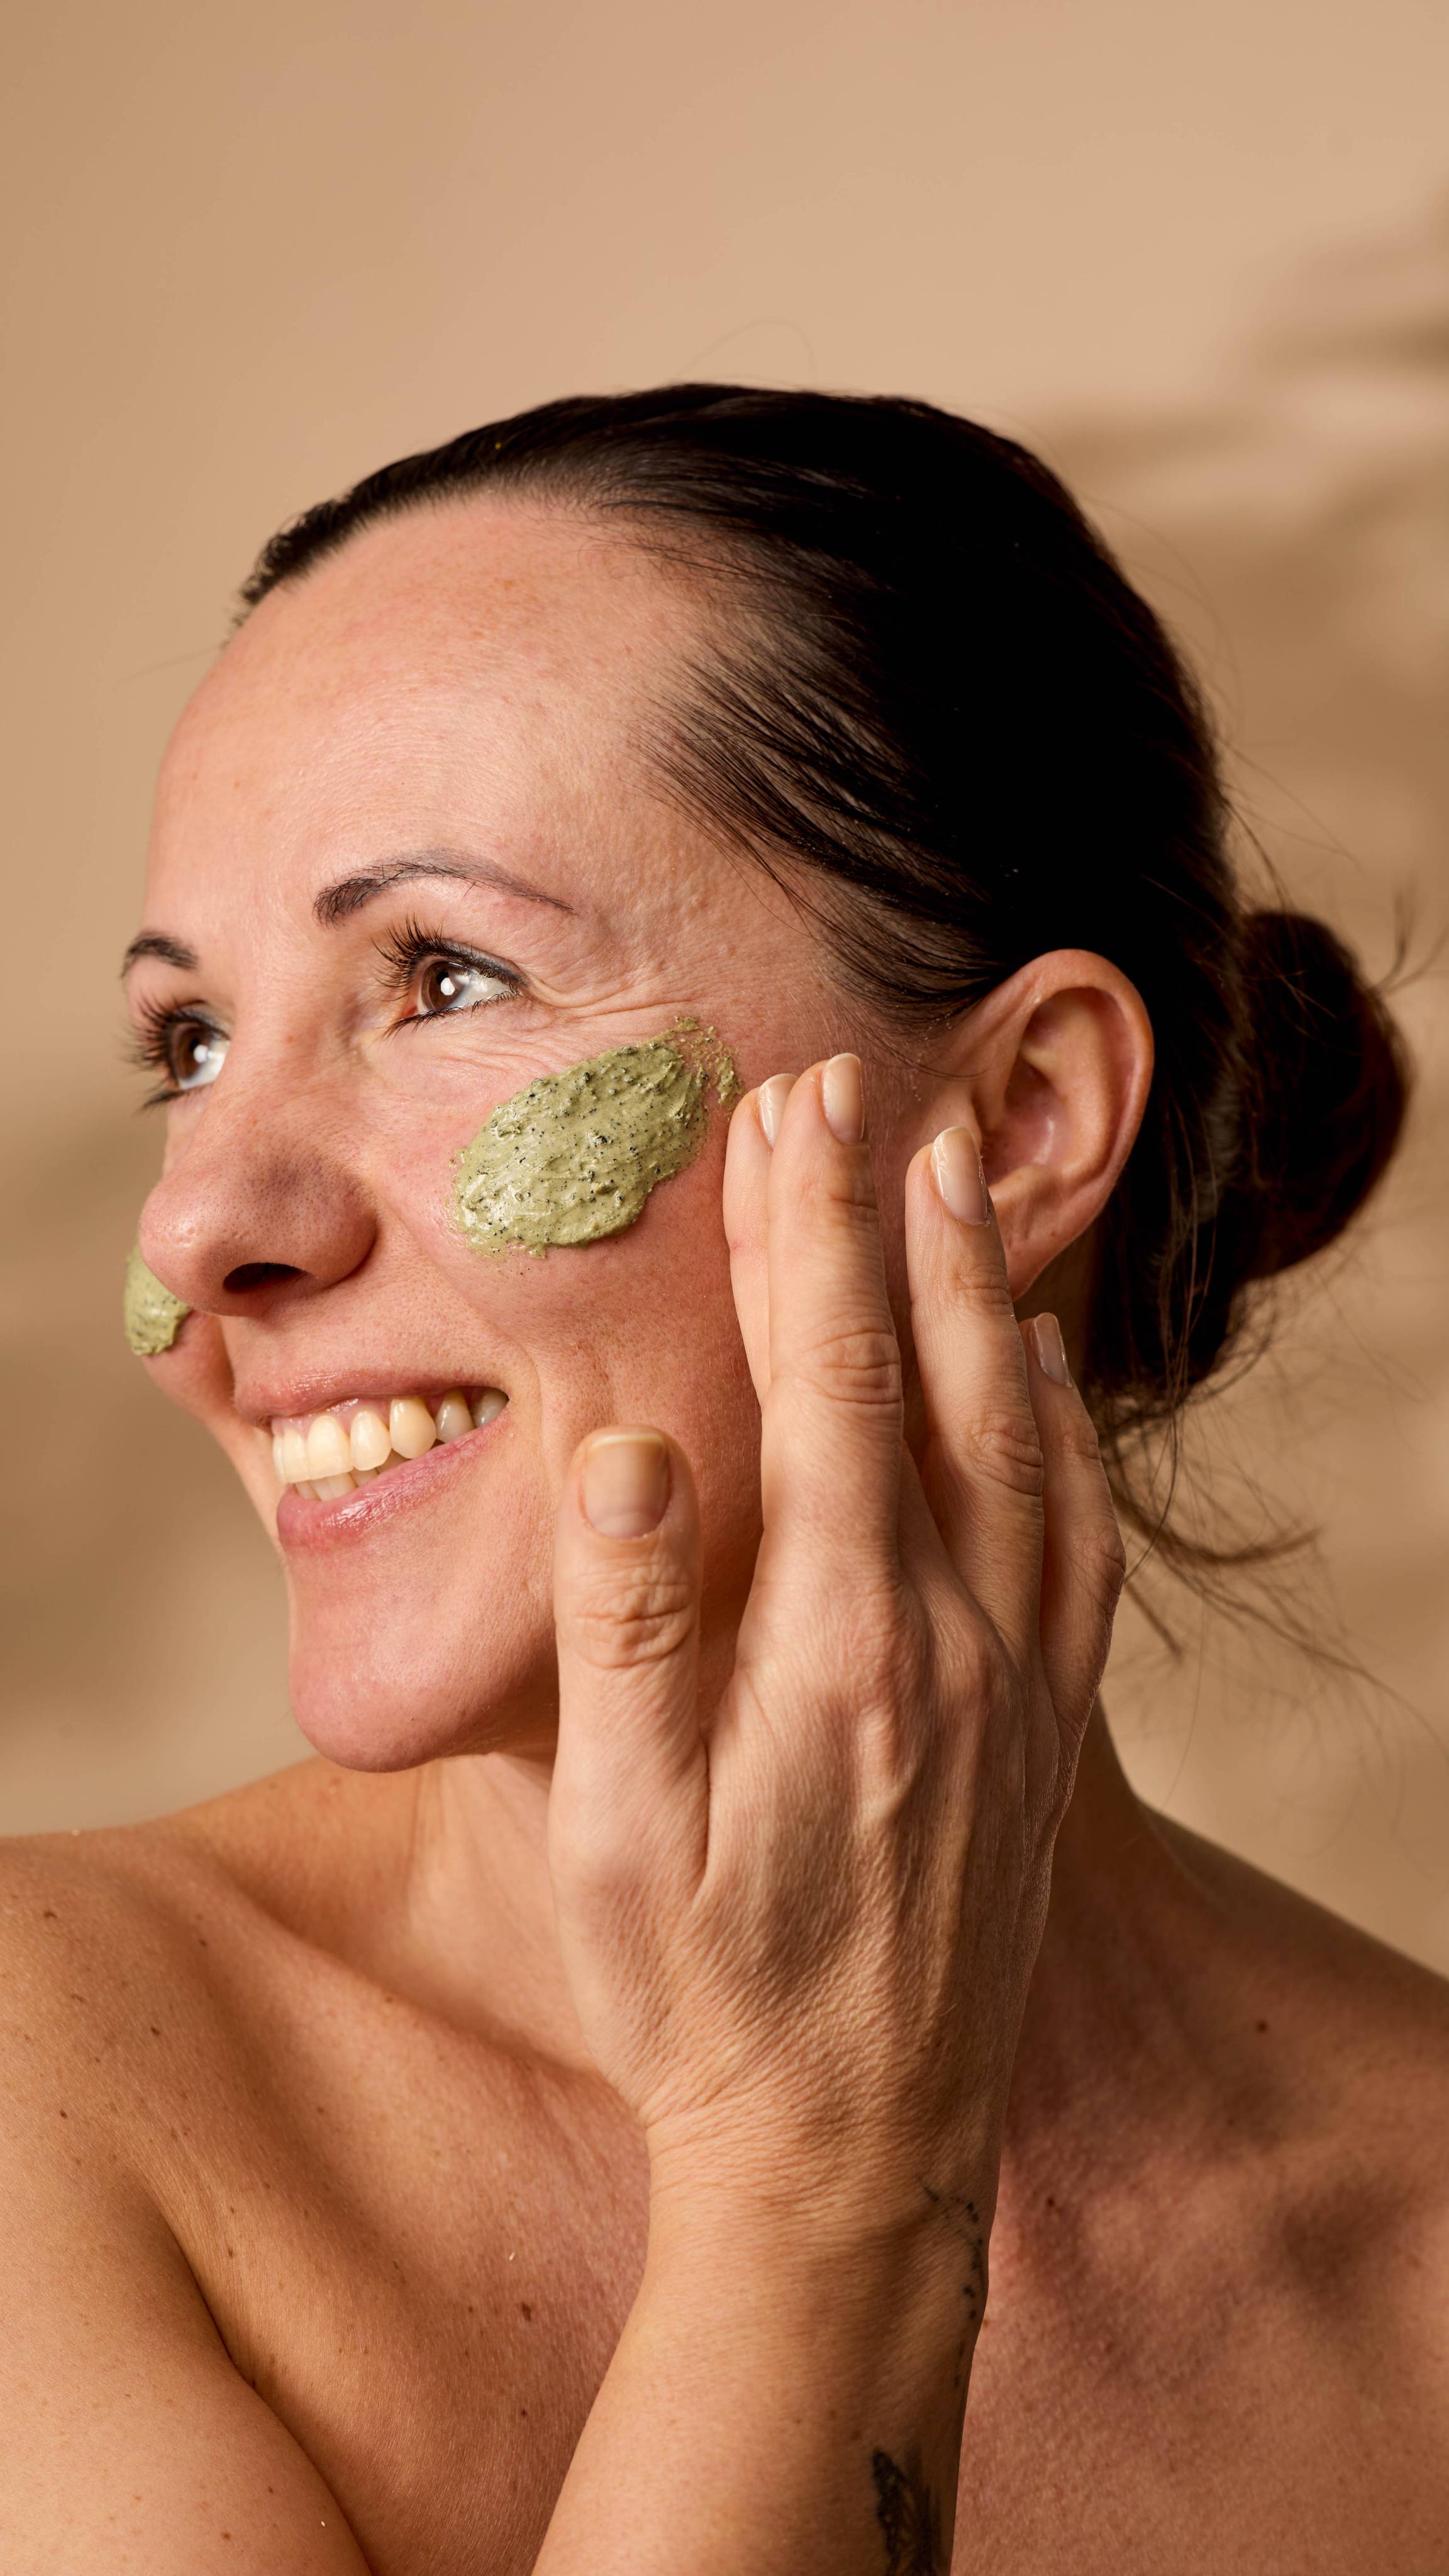 The model is smiling as they apply the green Matcha face mask to their other cheek under warm lighting.